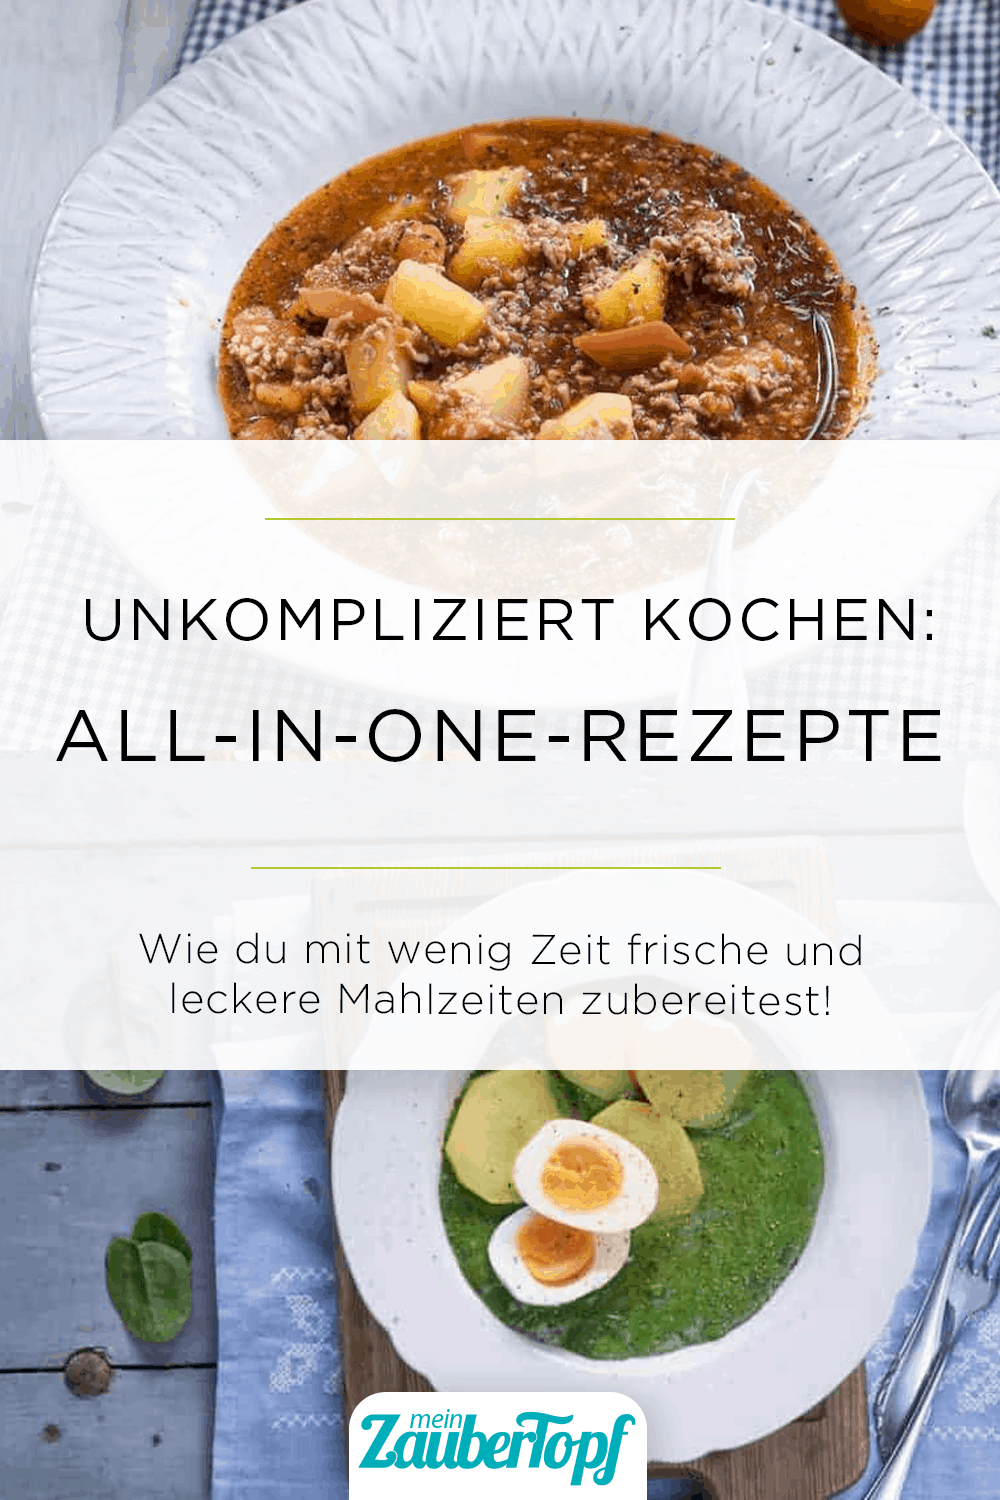 All in one rezepte thermomix - Unser Testsieger 